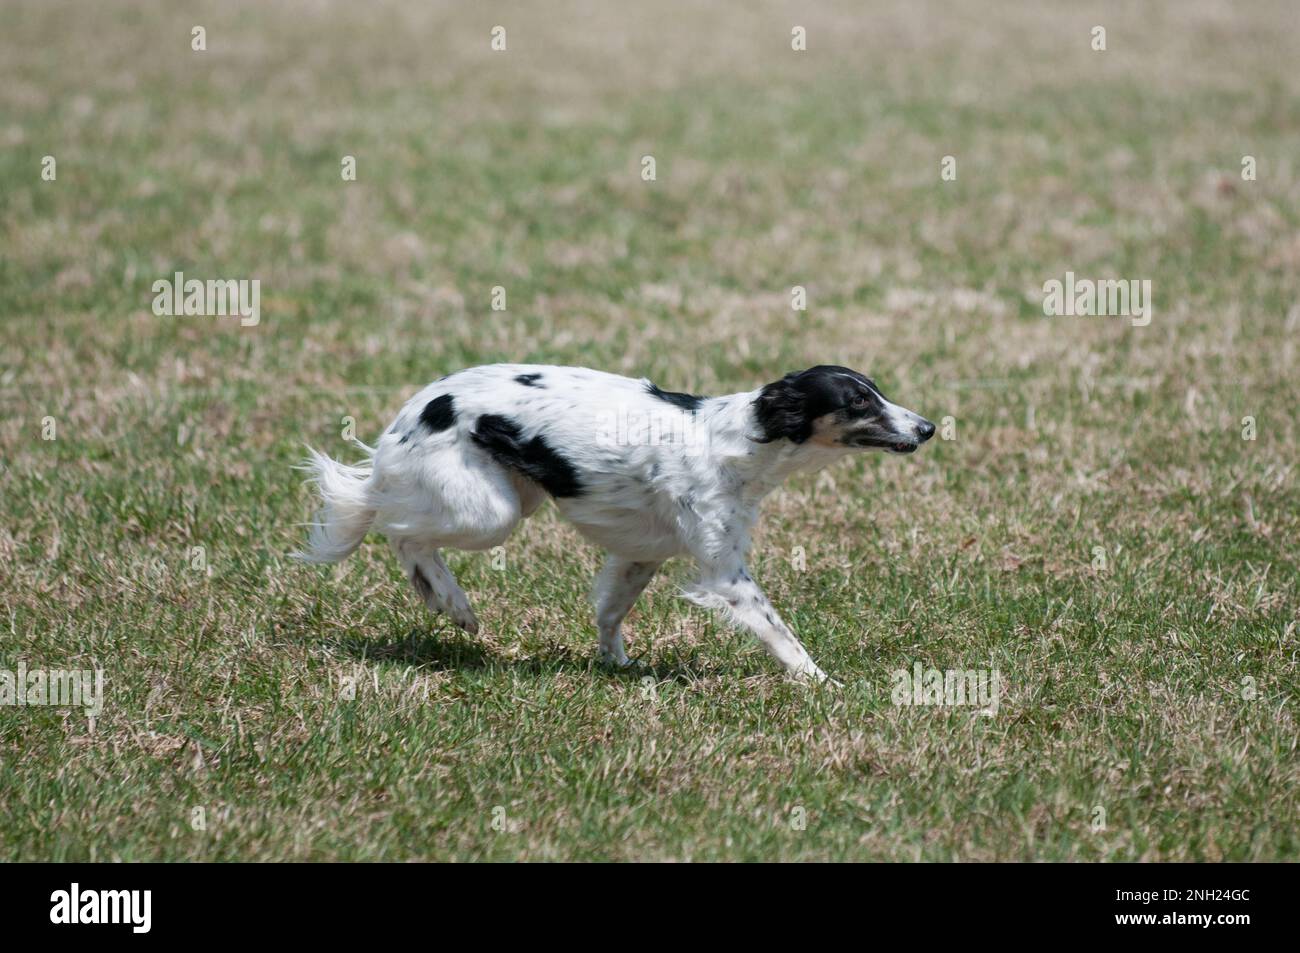 Sighthound chasing the lure at lure coursing event Stock Photo